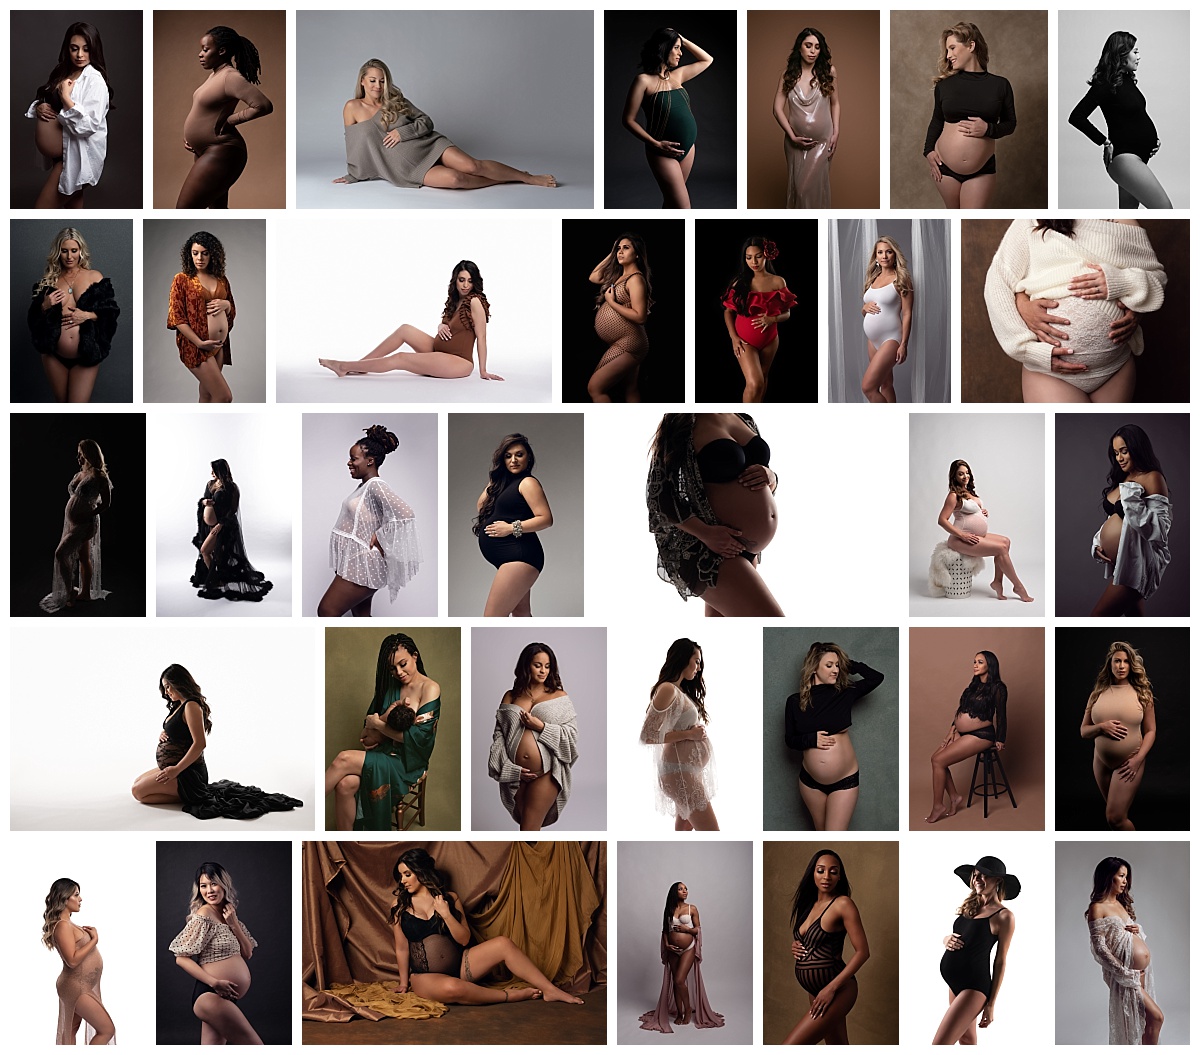 #1 Houston Maternity Photographer has a vast wardrobe made to flatter every mother's body.